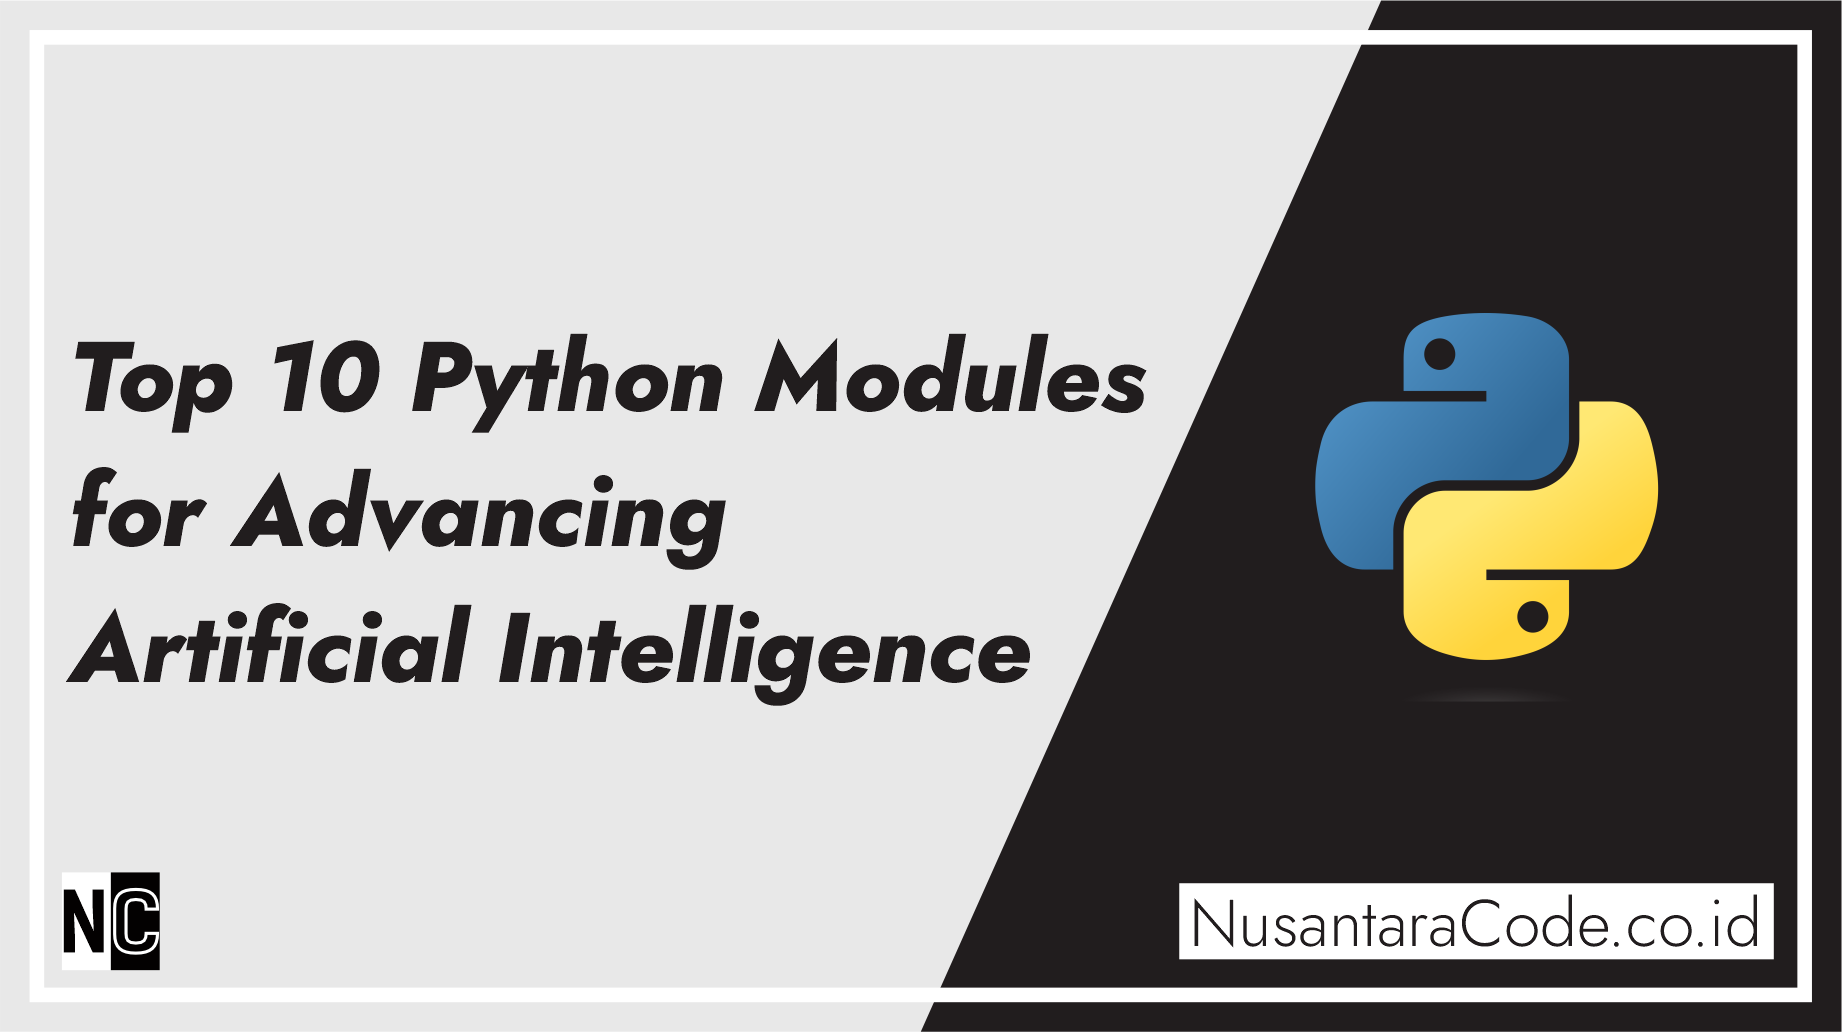 Top 10 Python Modules for Advancing Artificial Intelligence